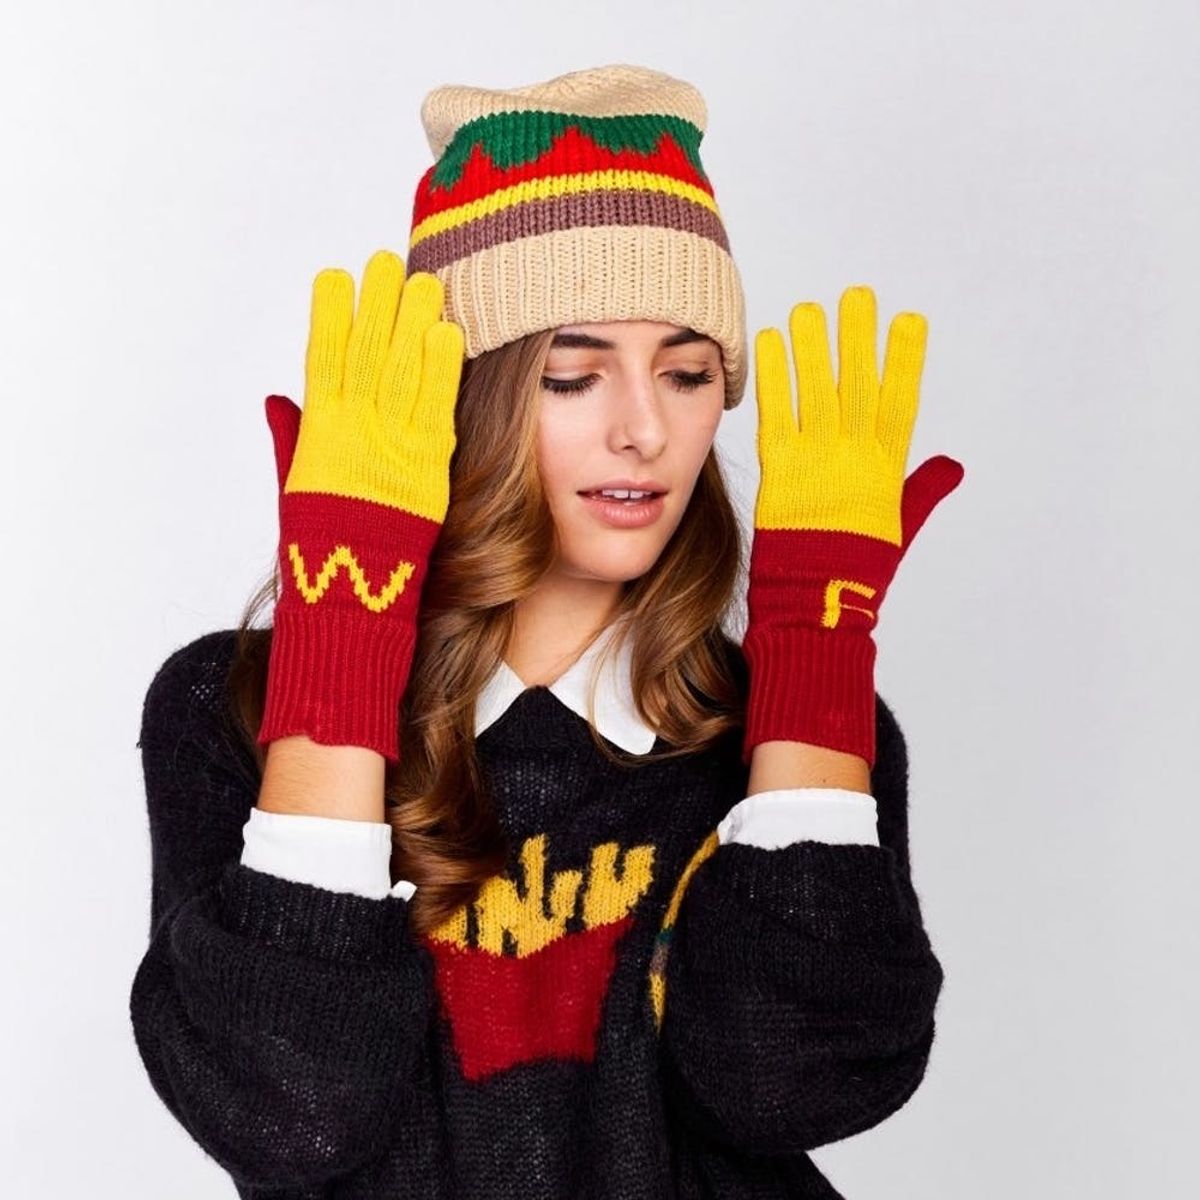 17 Cheeky Cold Weather Accessories That Will Make You LOL